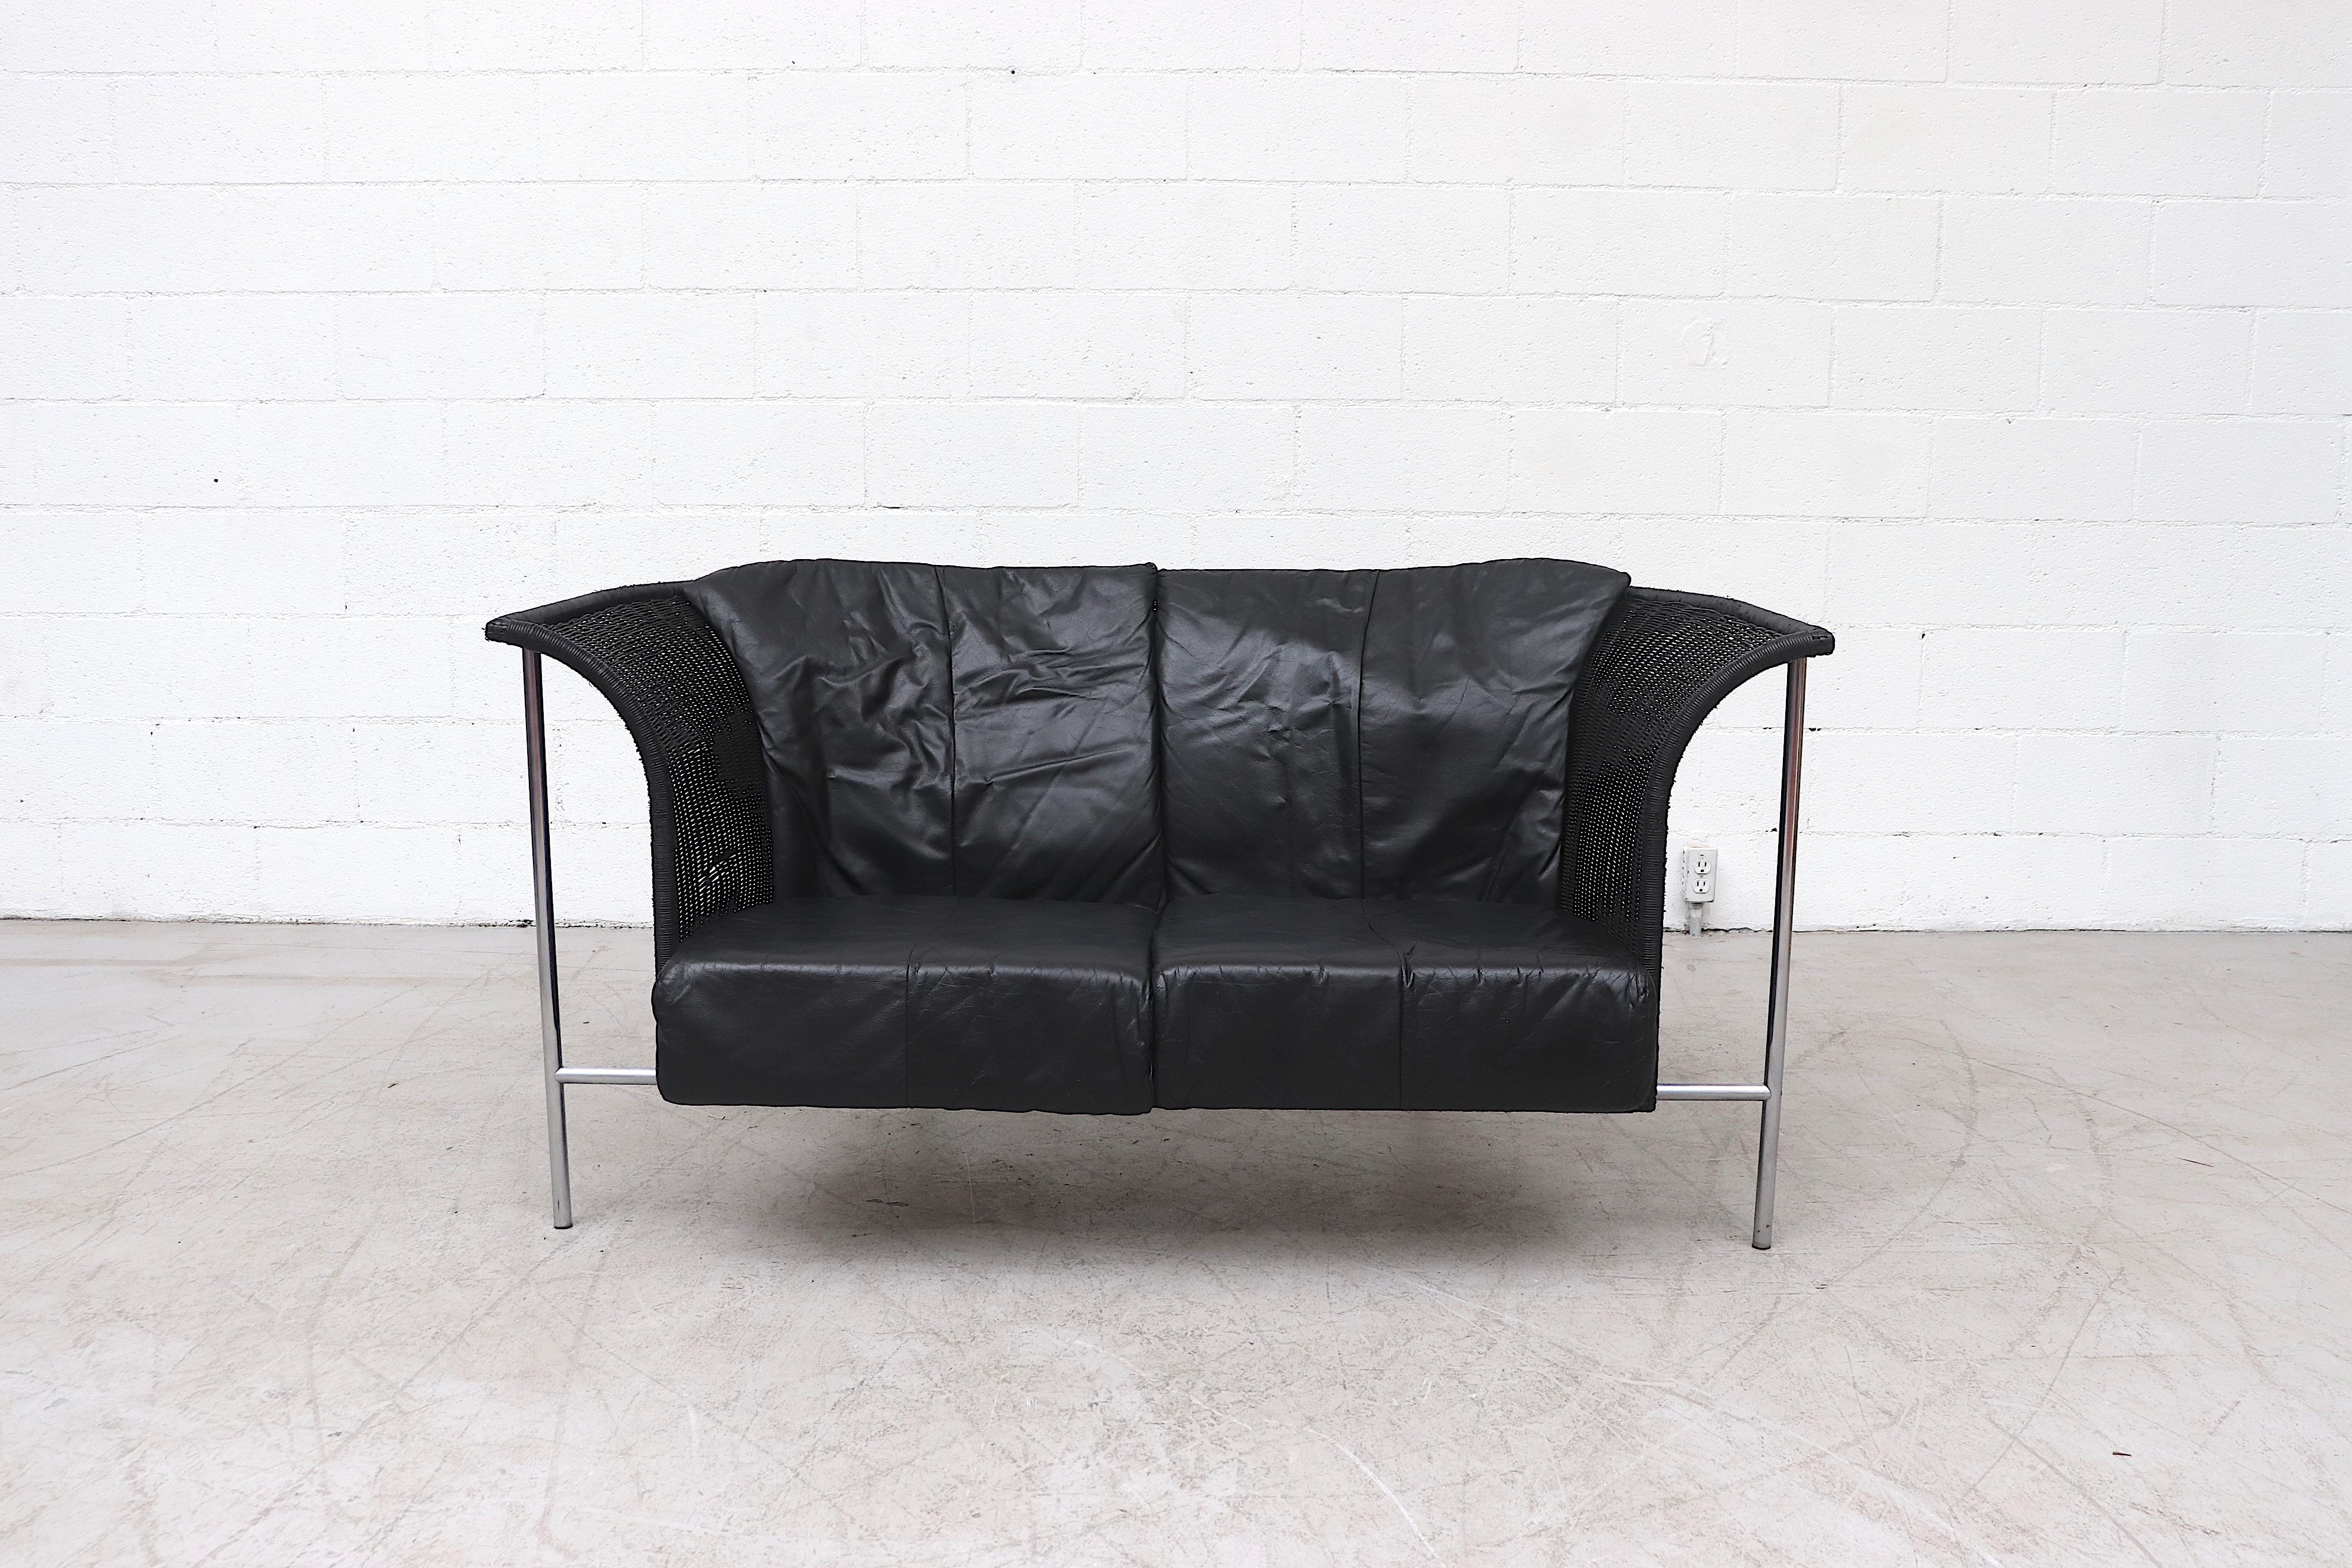 Handsome Gerard van den Berg style wing back black rattan 2-seat sofa with black leather cushions on tubular chrome frame. In original condition with light rattan breakage and some light frame rust.